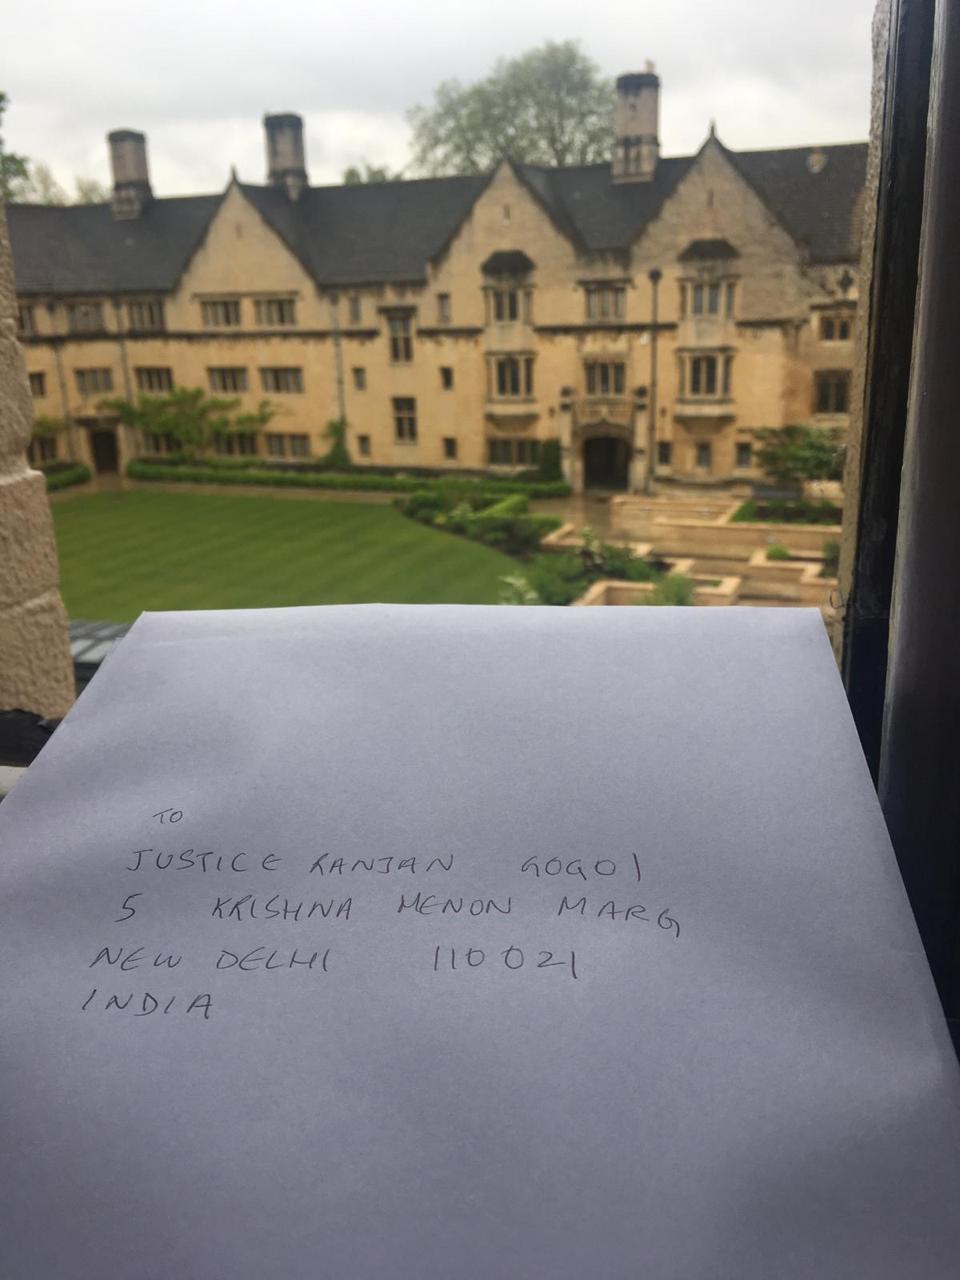 A student from Oxford sending the copy